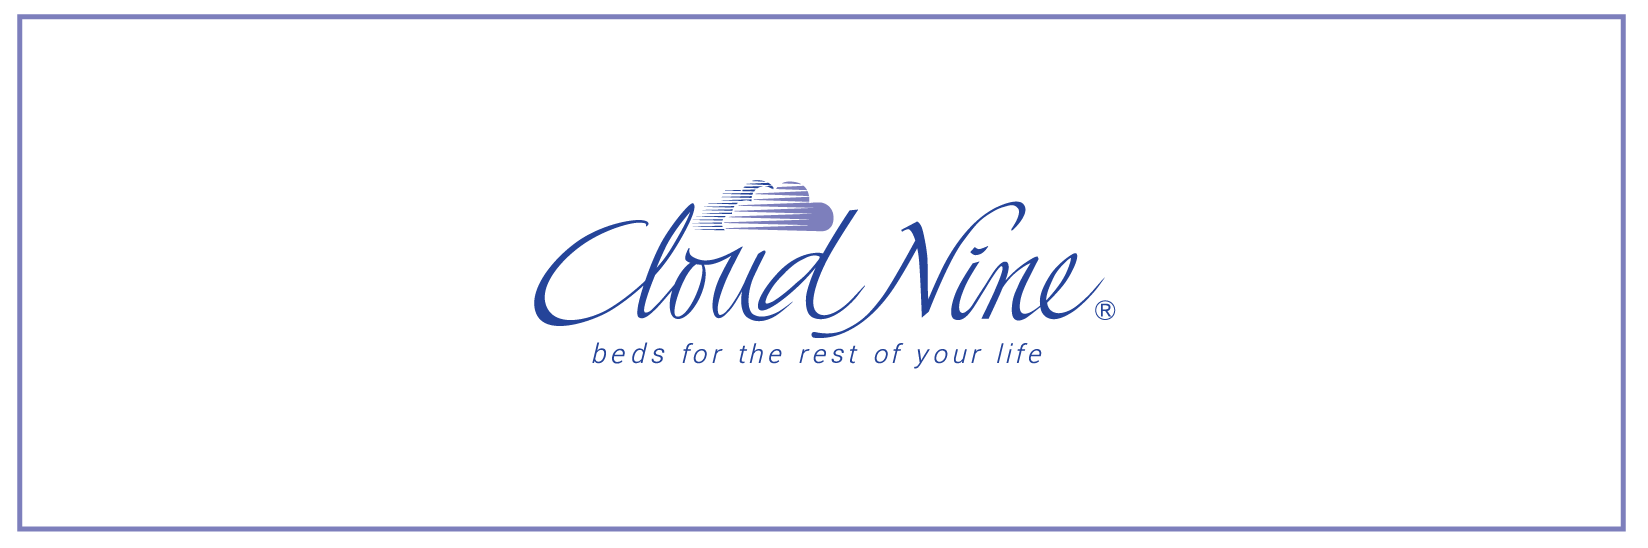 A Guide to the Cloud Nine Bed Range 